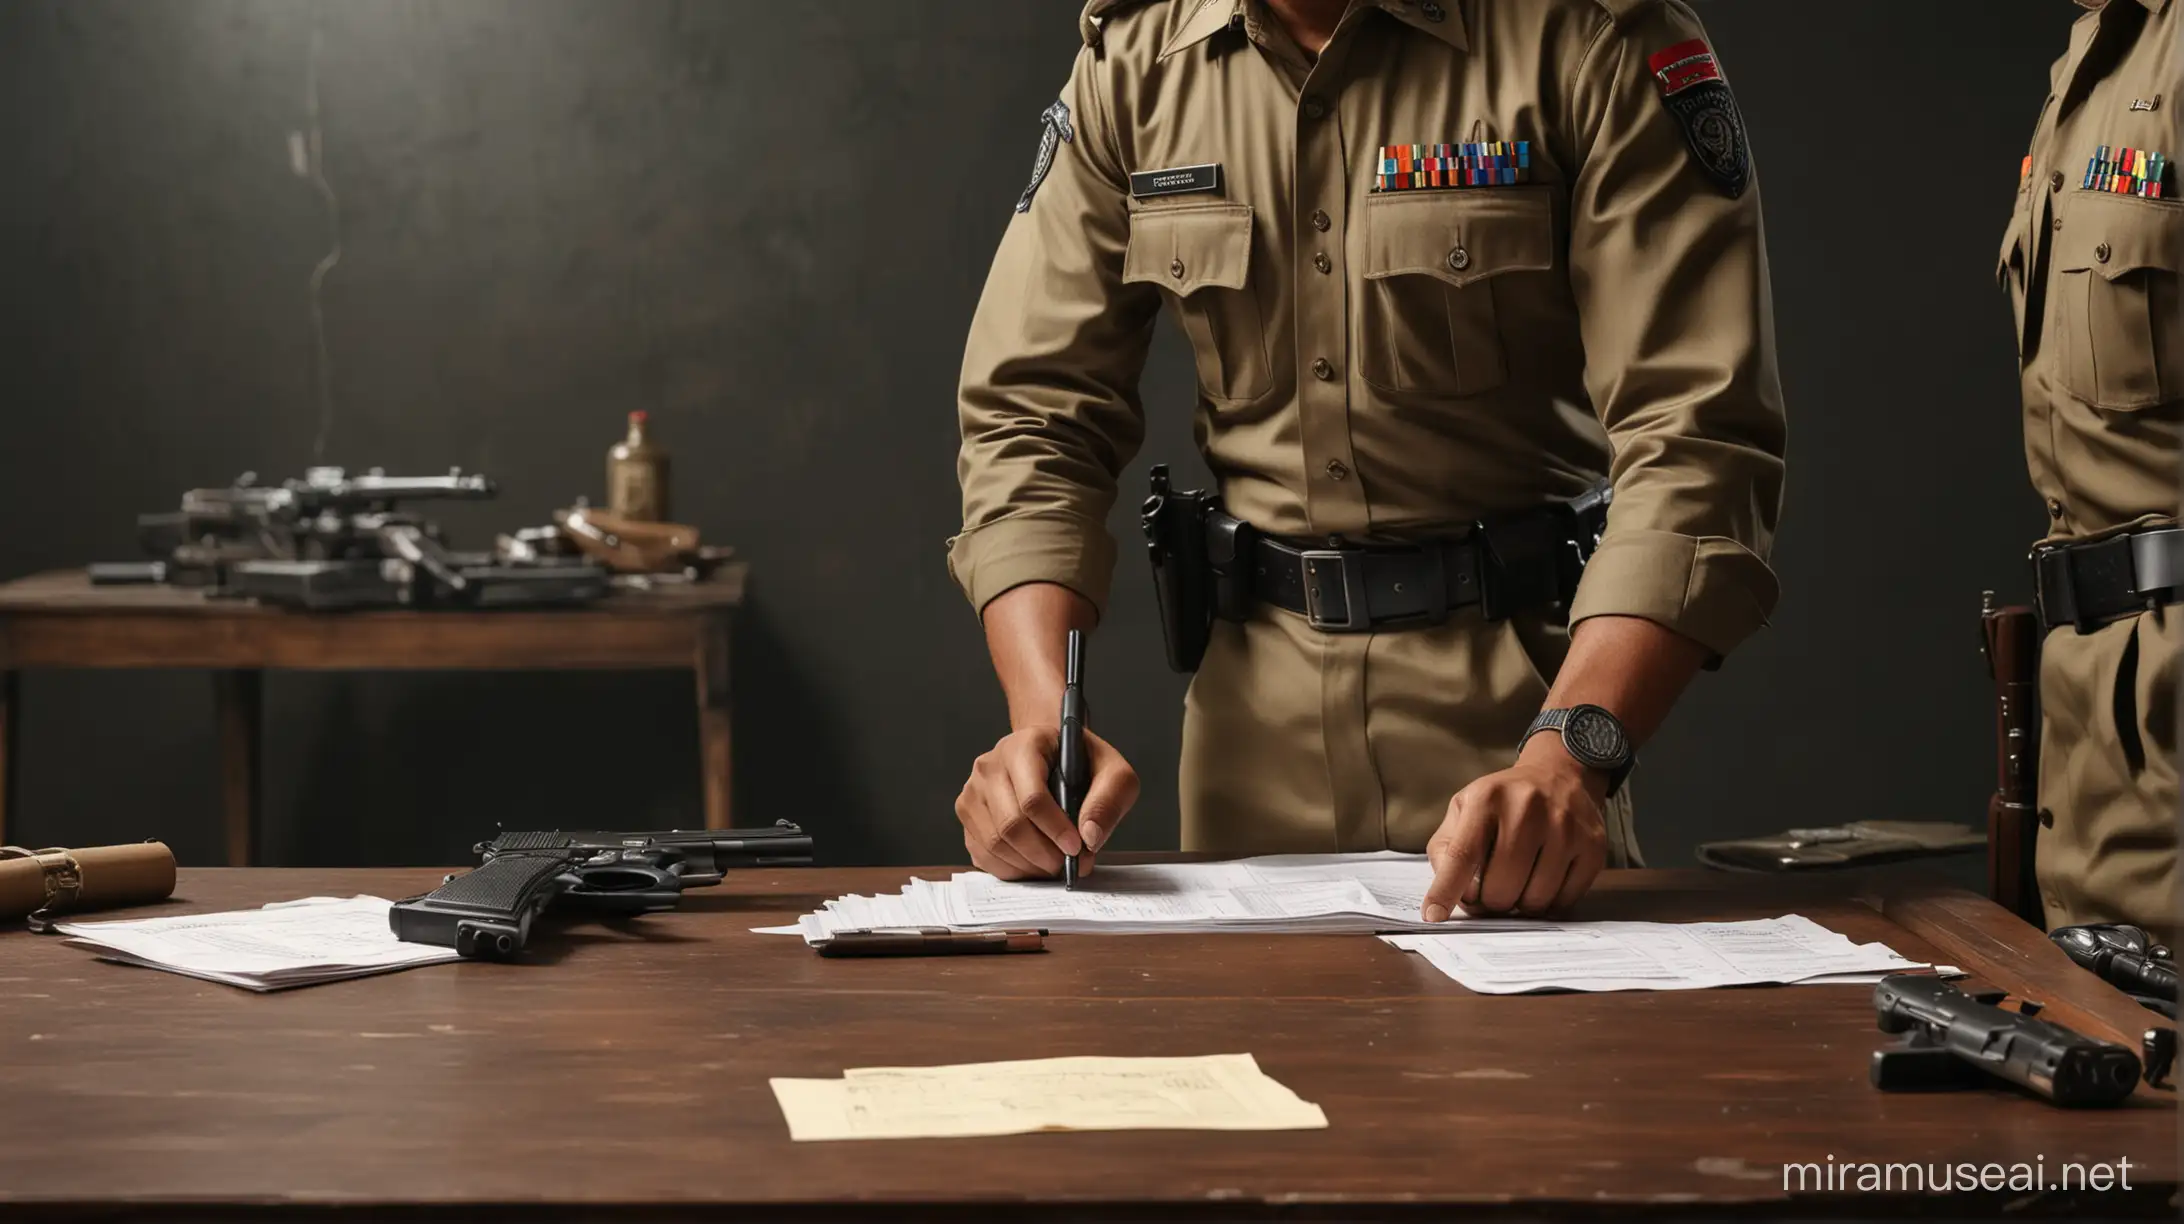 There are three guns on the table, focus on table only, indian police man wearing khake dress write something on register in background blur, dark background, realistic, hyper detailed